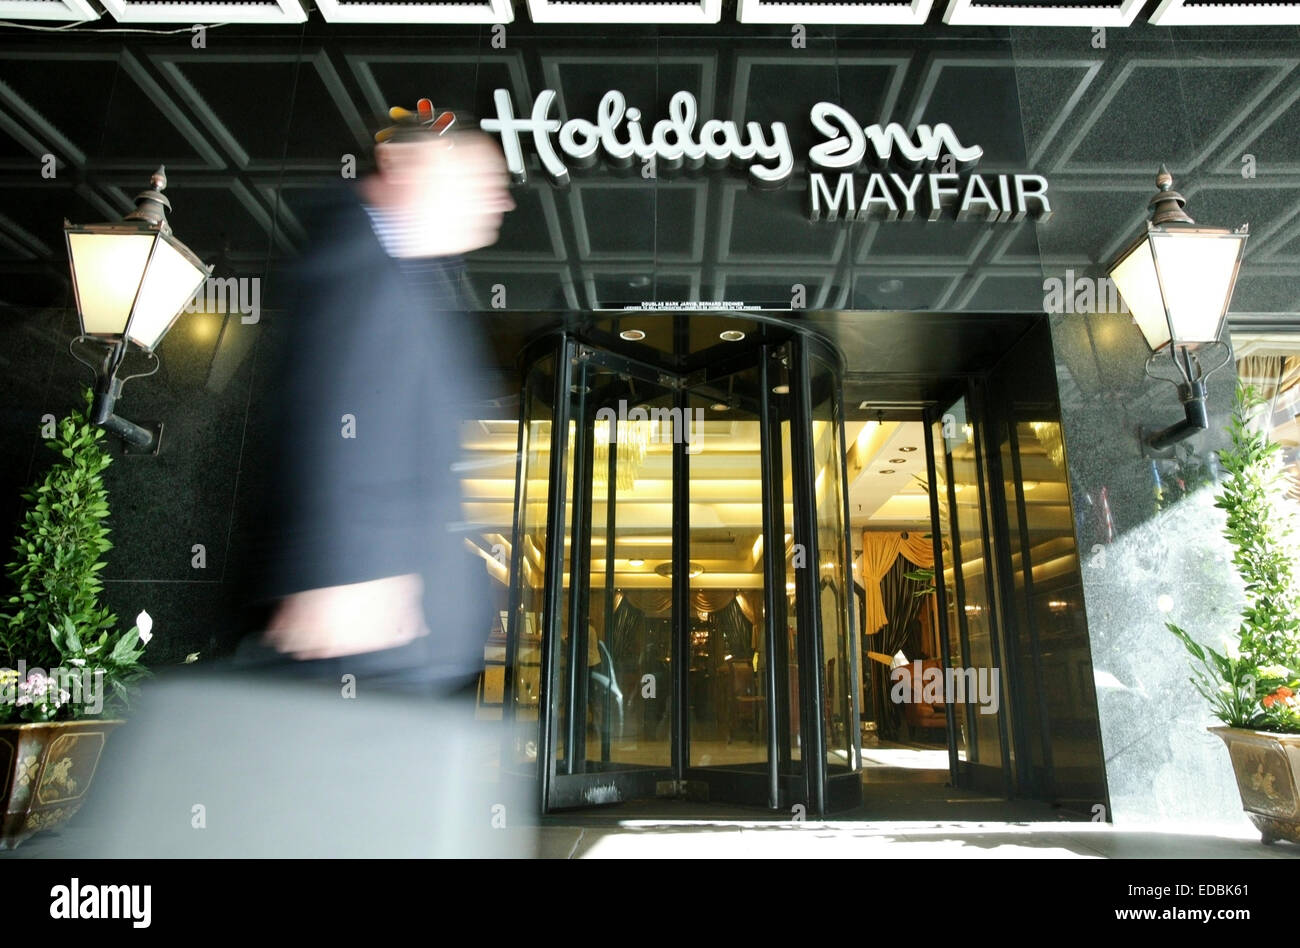 Picture shows the Holiday Inn in Mayfair, London part of the Intercontinental Hotel Group. Stock Photo